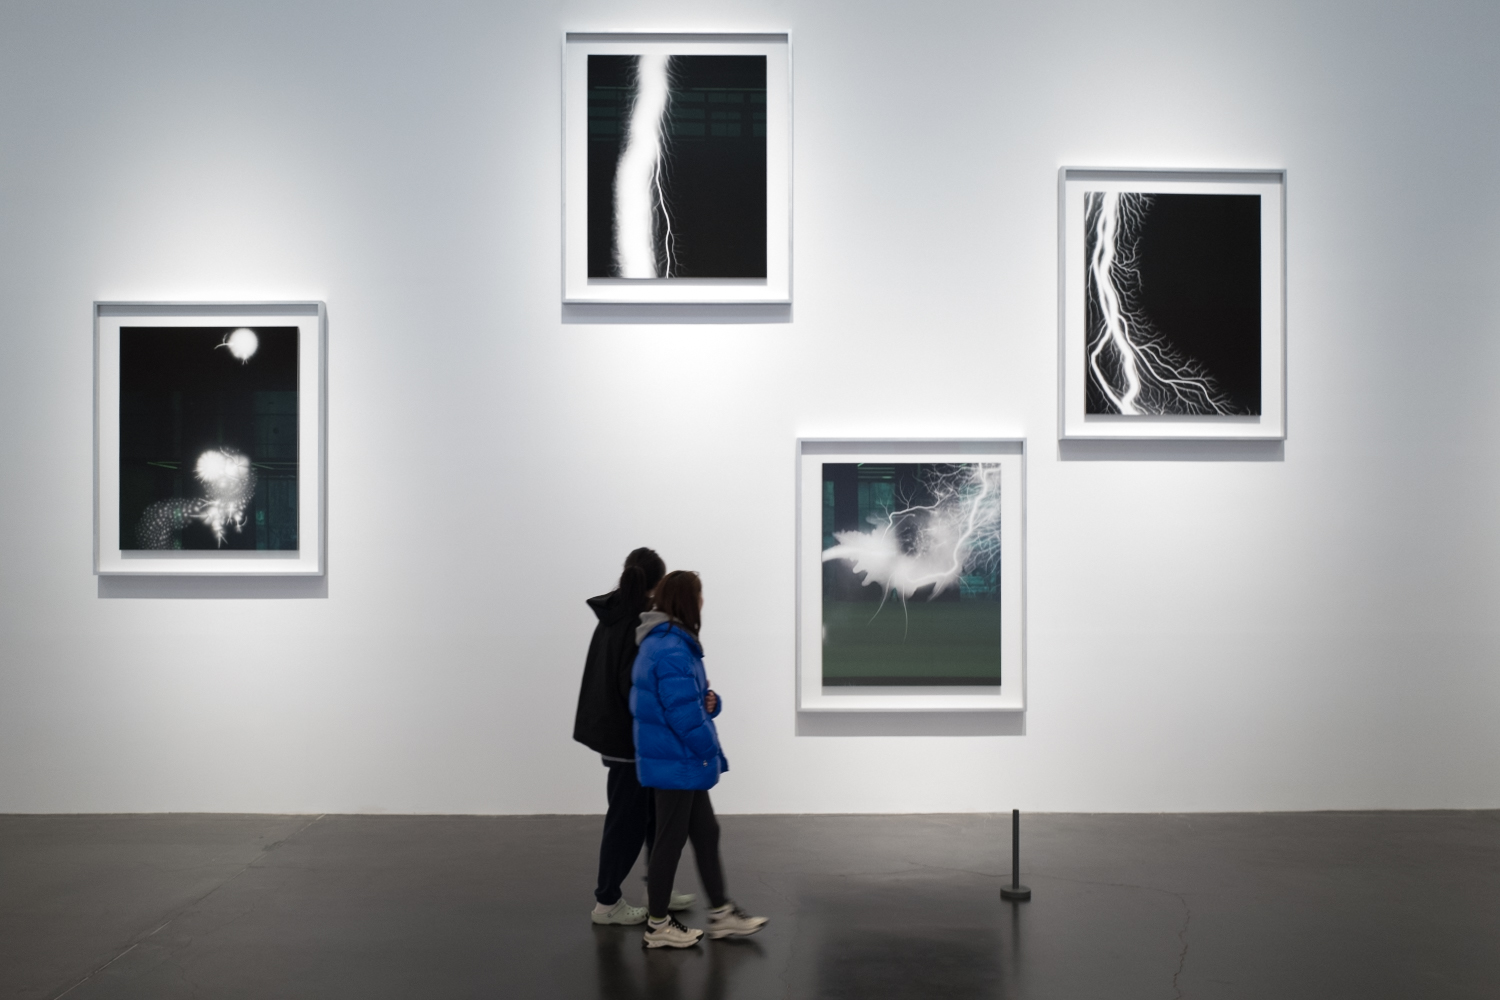 Pieces from Japanese artist Hiroshi Sugimoto's 